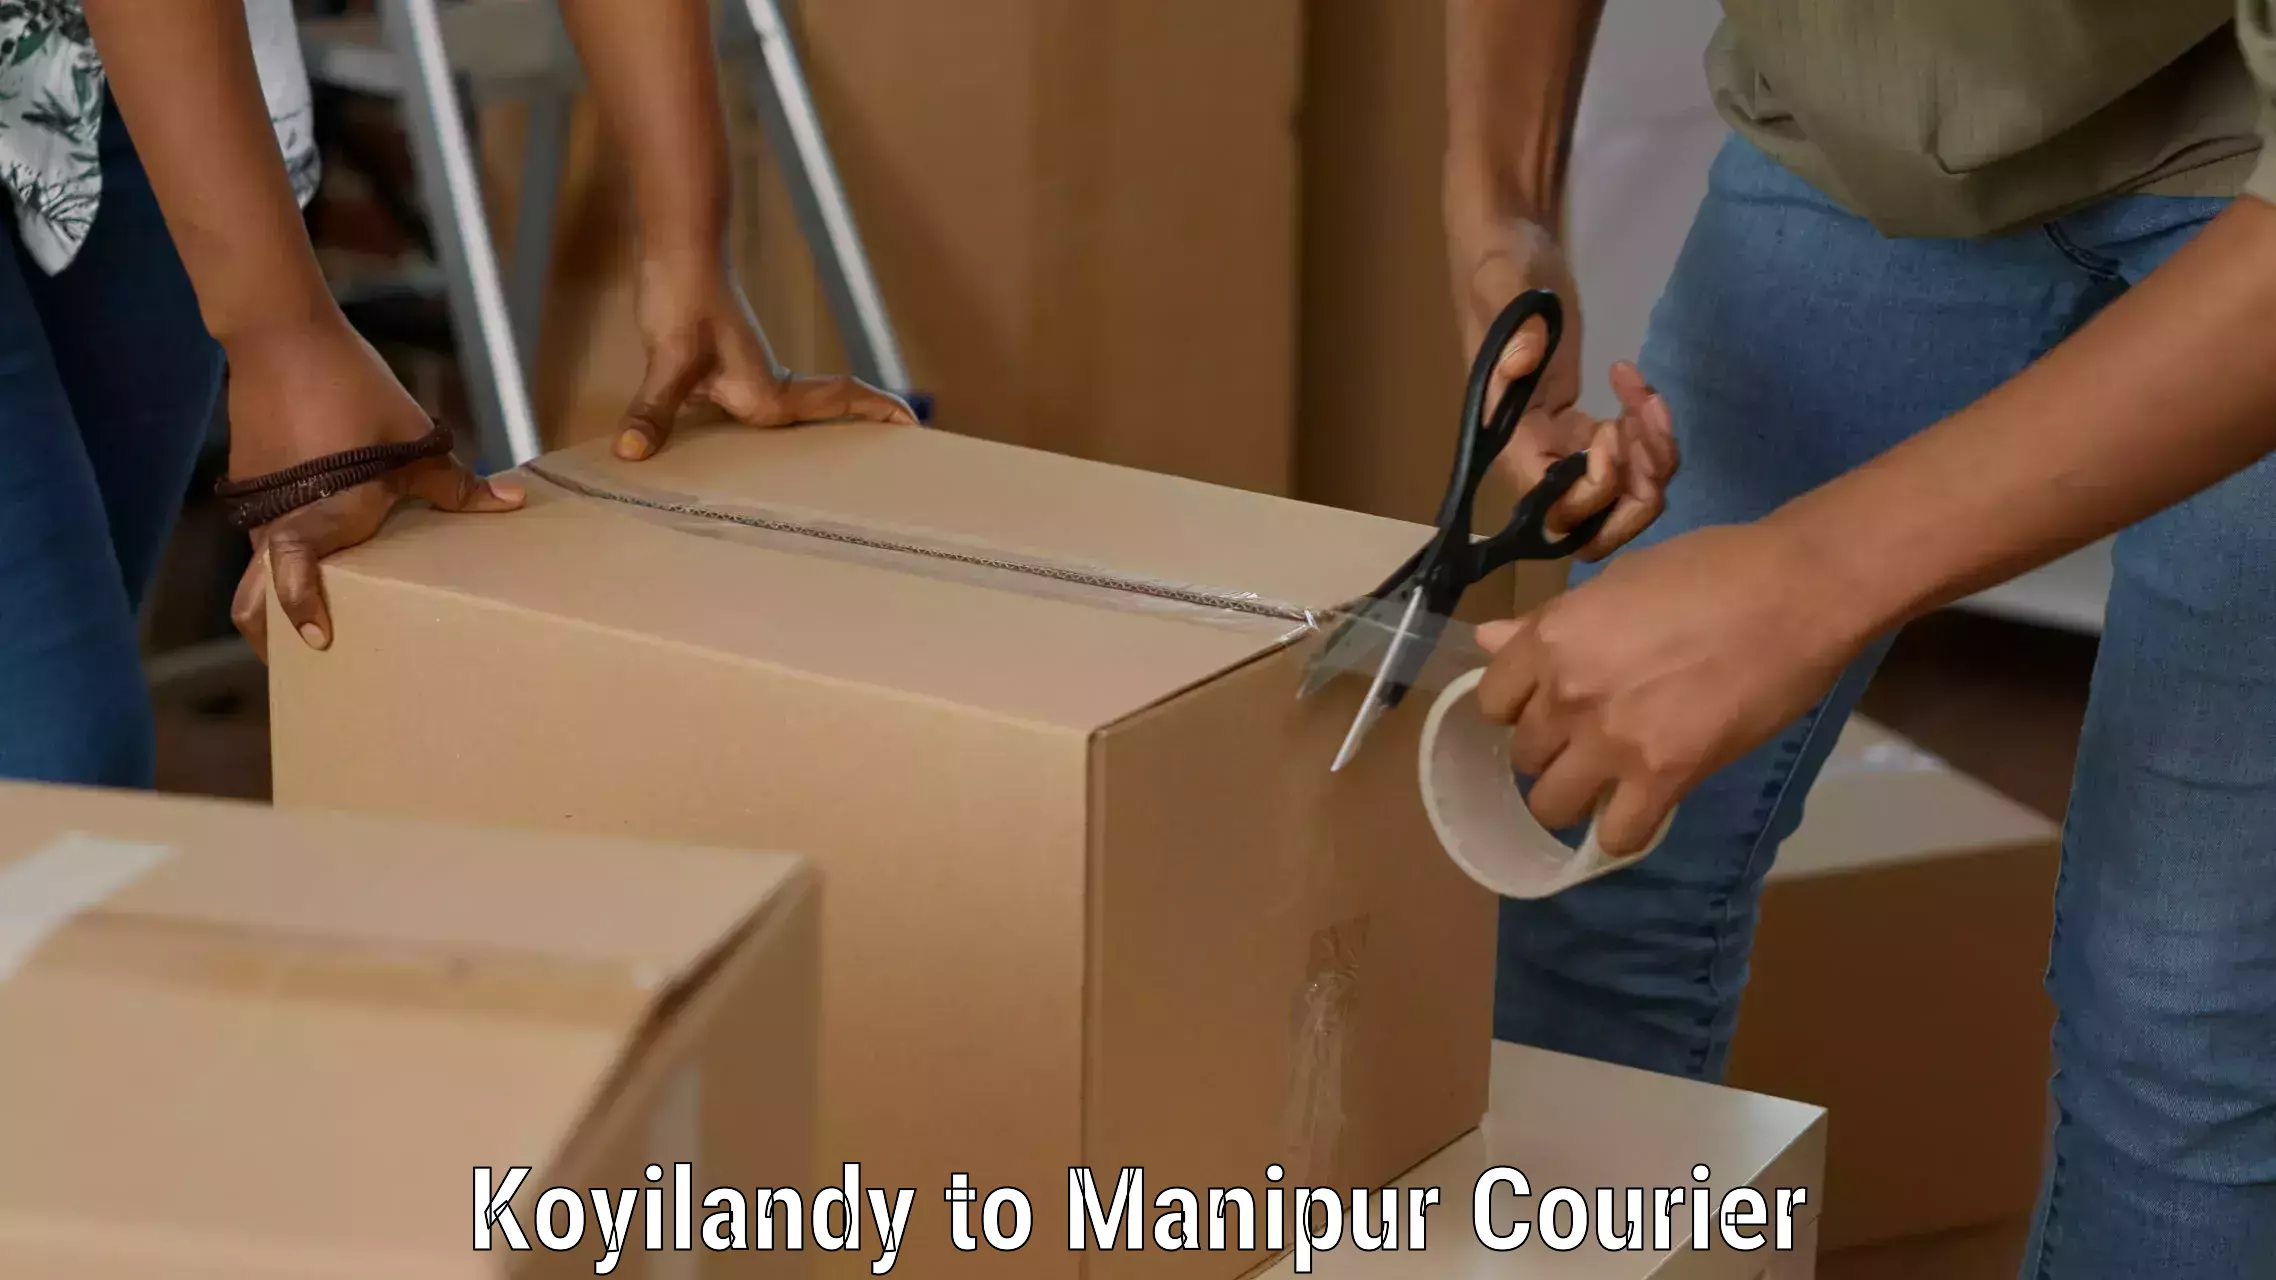 Courier service innovation Koyilandy to Manipur